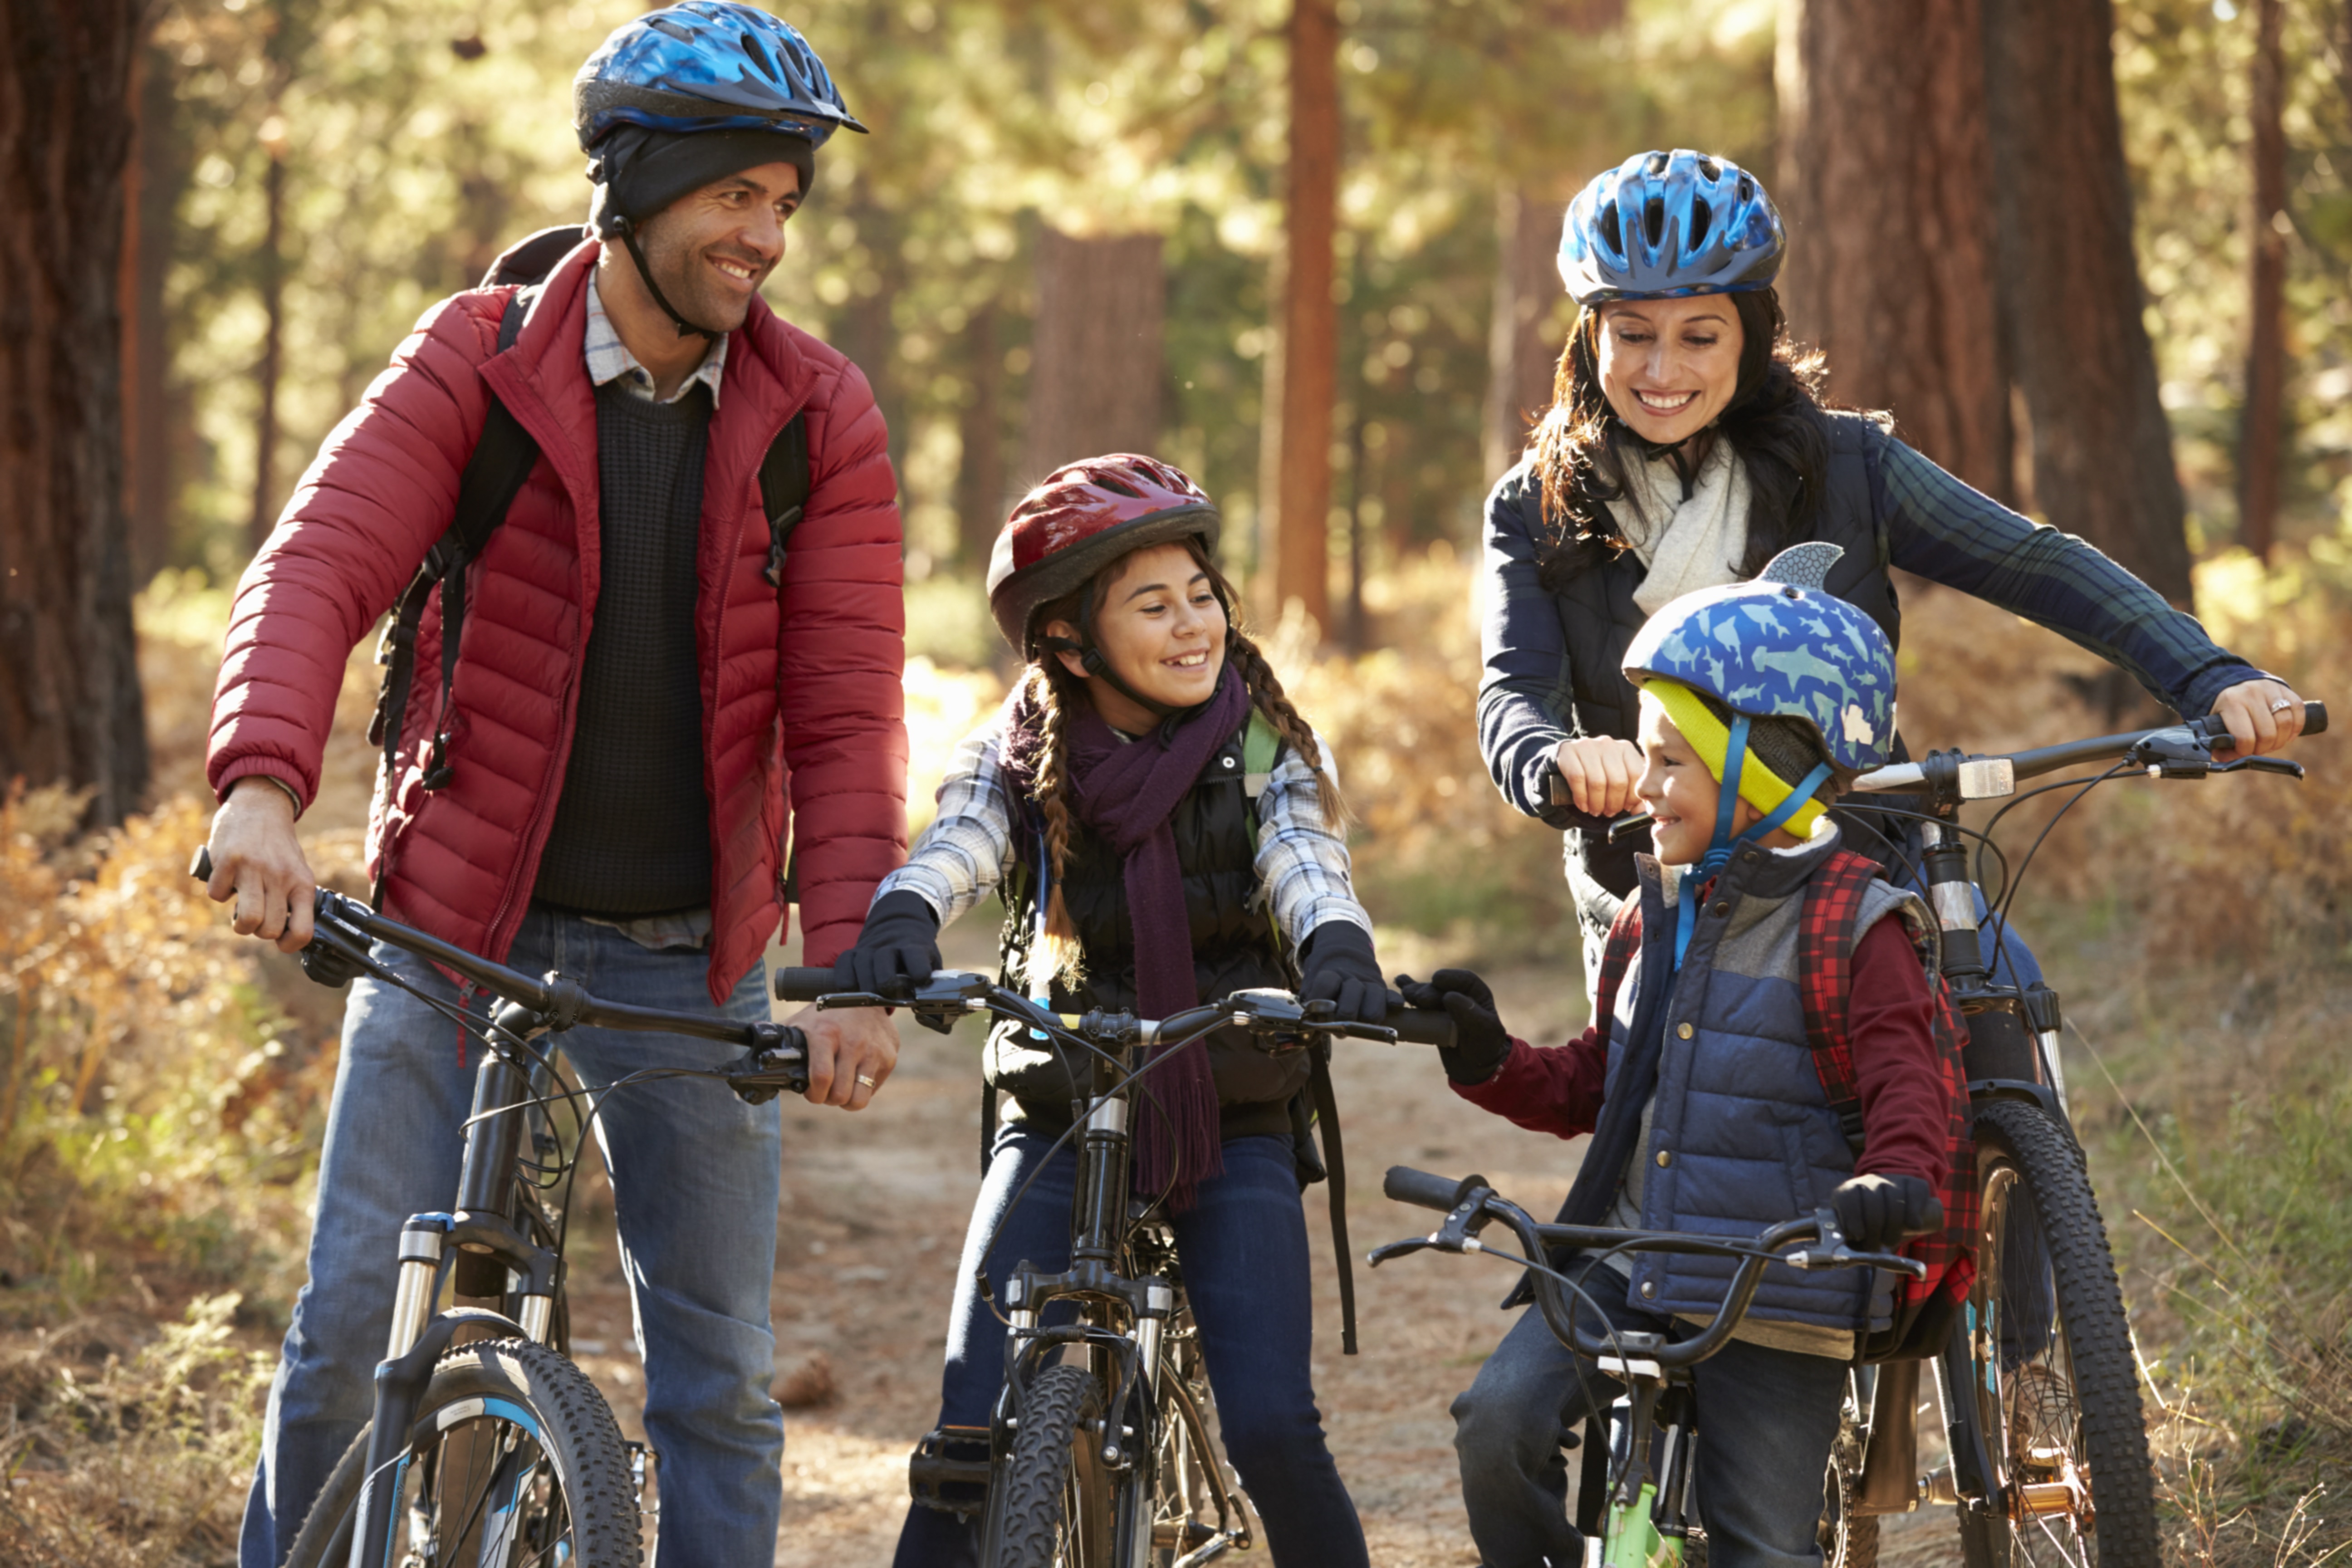 A man, a woman, a boy and a girl sit on bikes, looking toward each other and smiling. Each is wearing a jacket and a helmet. Behind them is a dirt path and several trees.